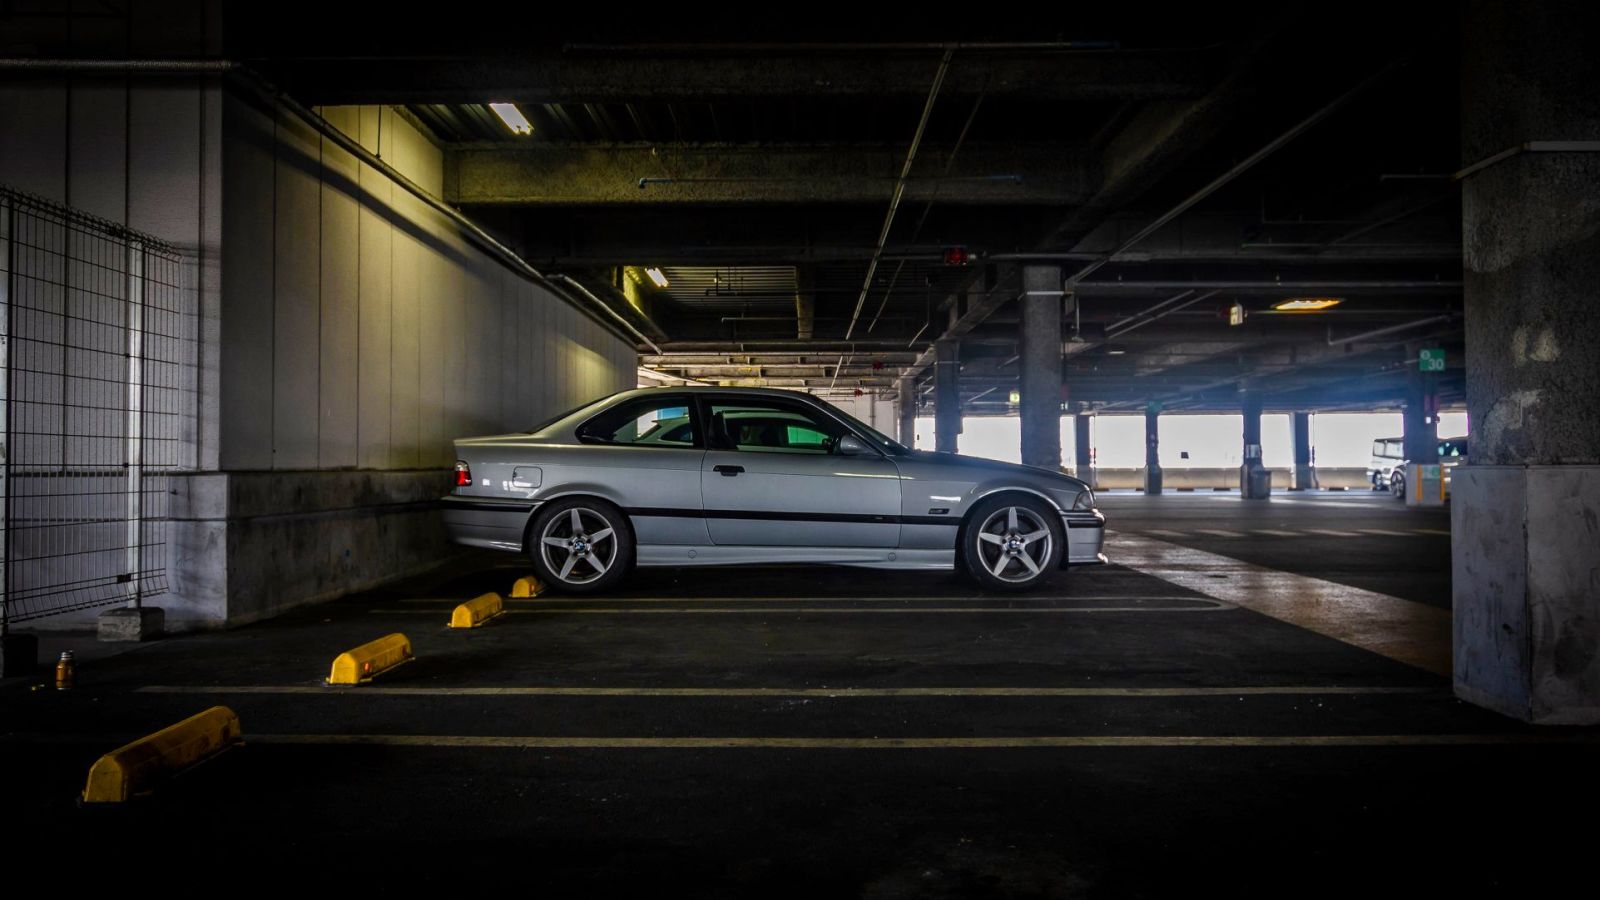 Illustration for article titled Euro Spec E36 M3 anyone??